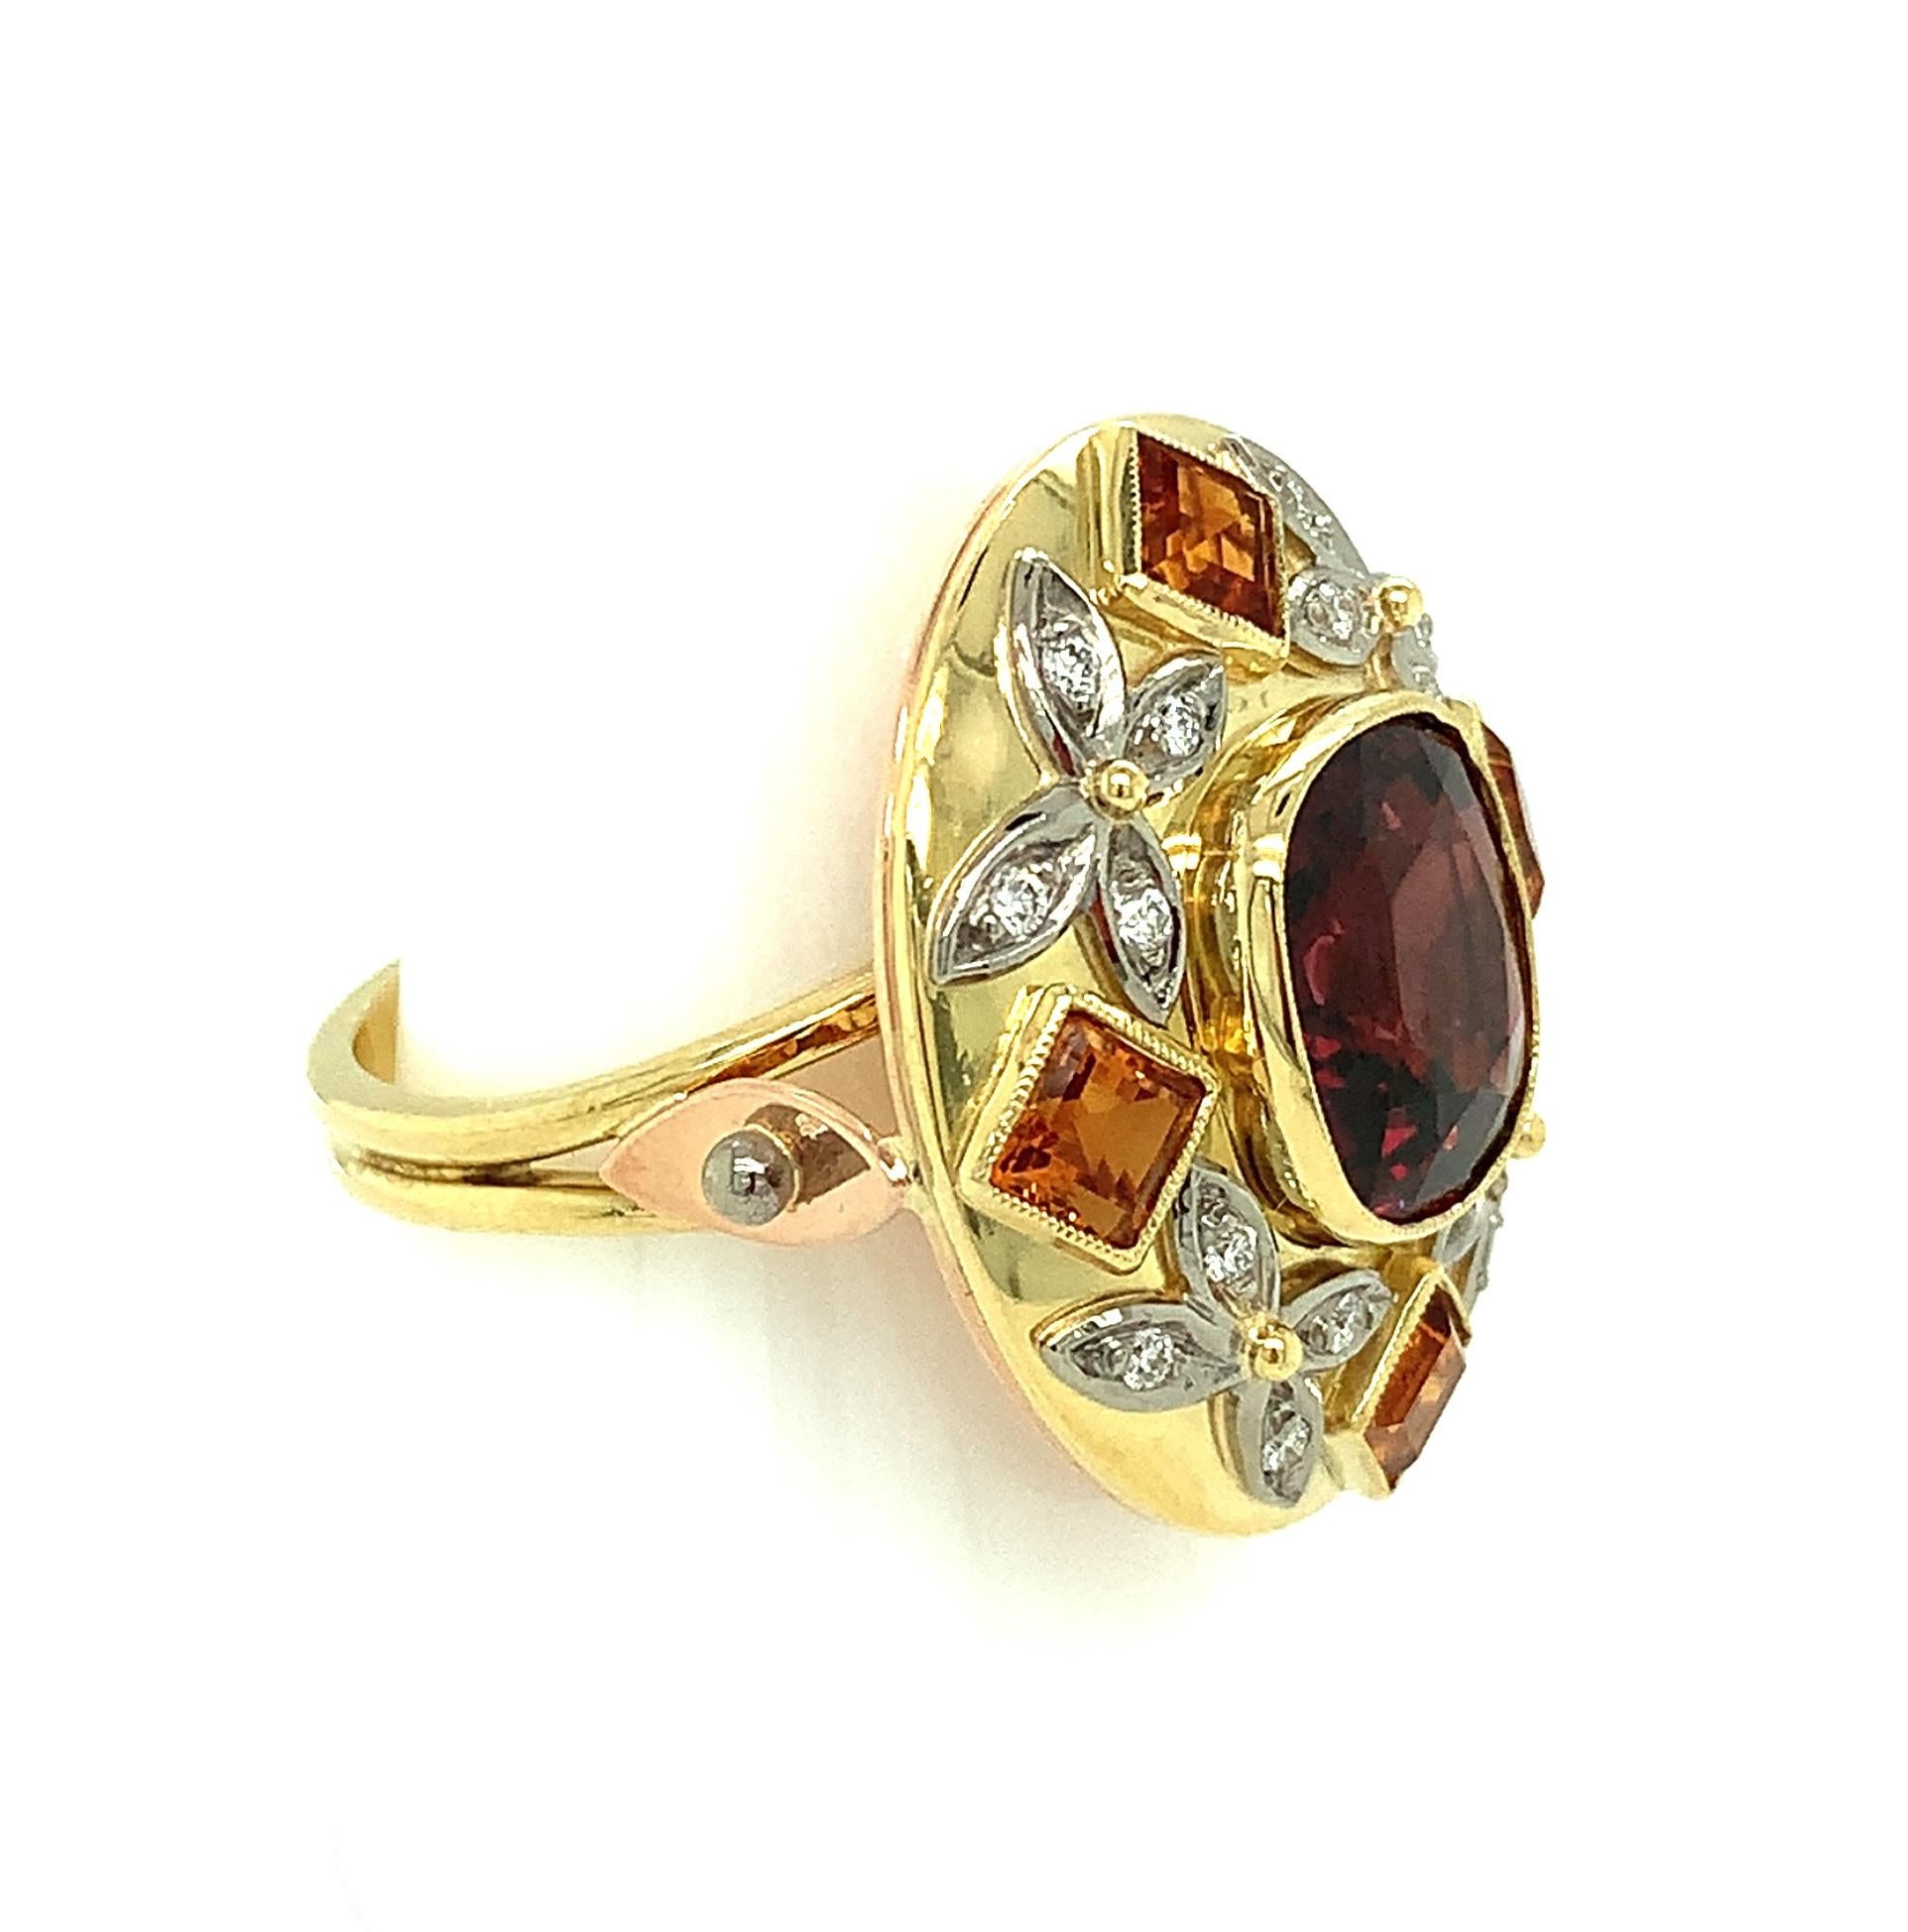 5.23 Carat Red Spinel, Citrine and Diamond Cocktail Ring in Tri-colored Gold In New Condition For Sale In Los Angeles, CA